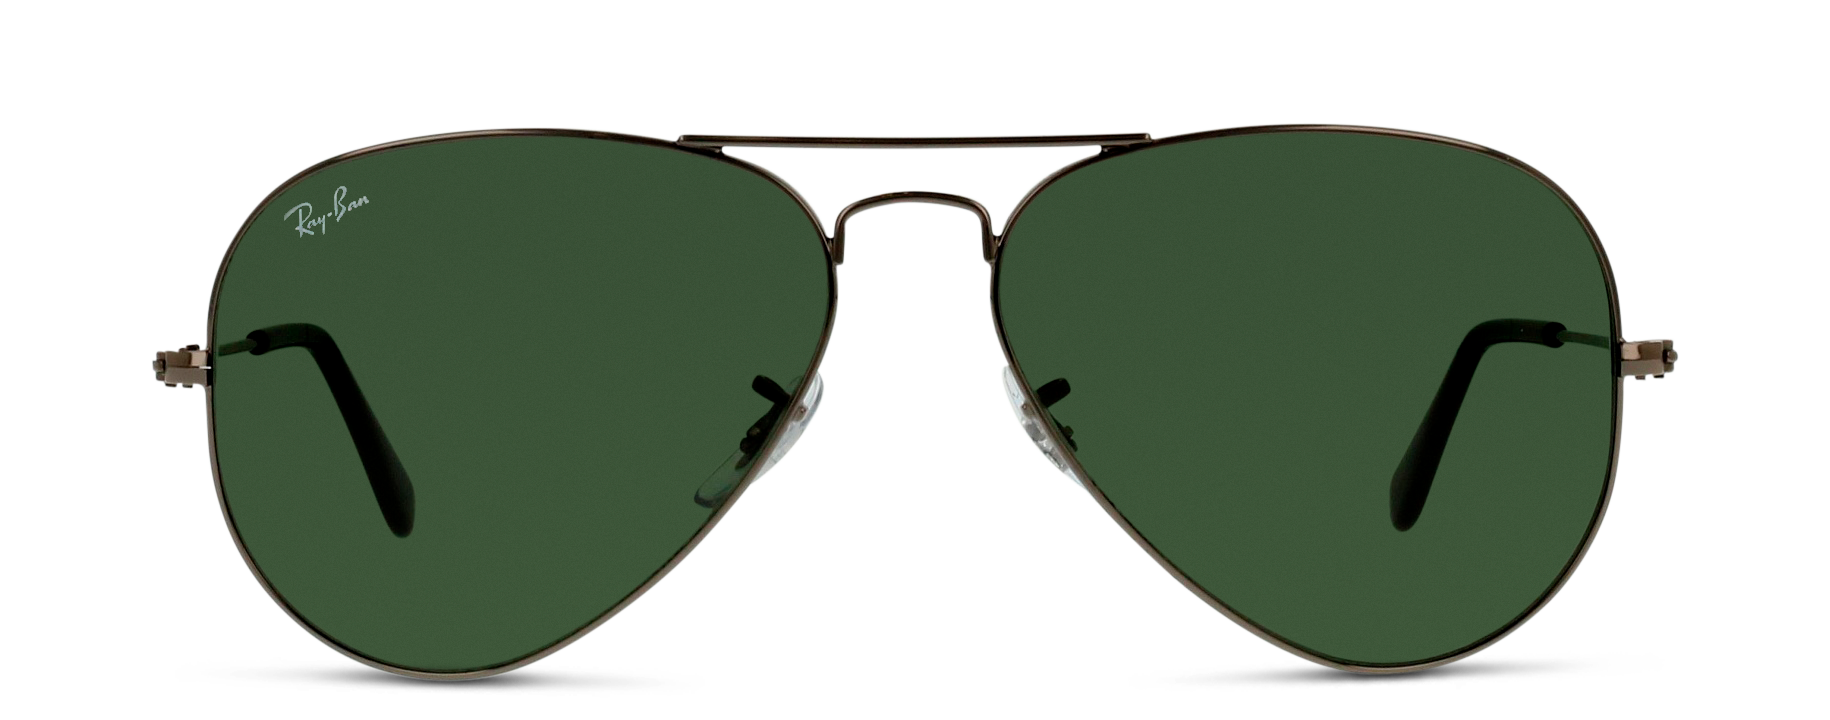 [products.image.front] RAY-BAN RB3025 W0879